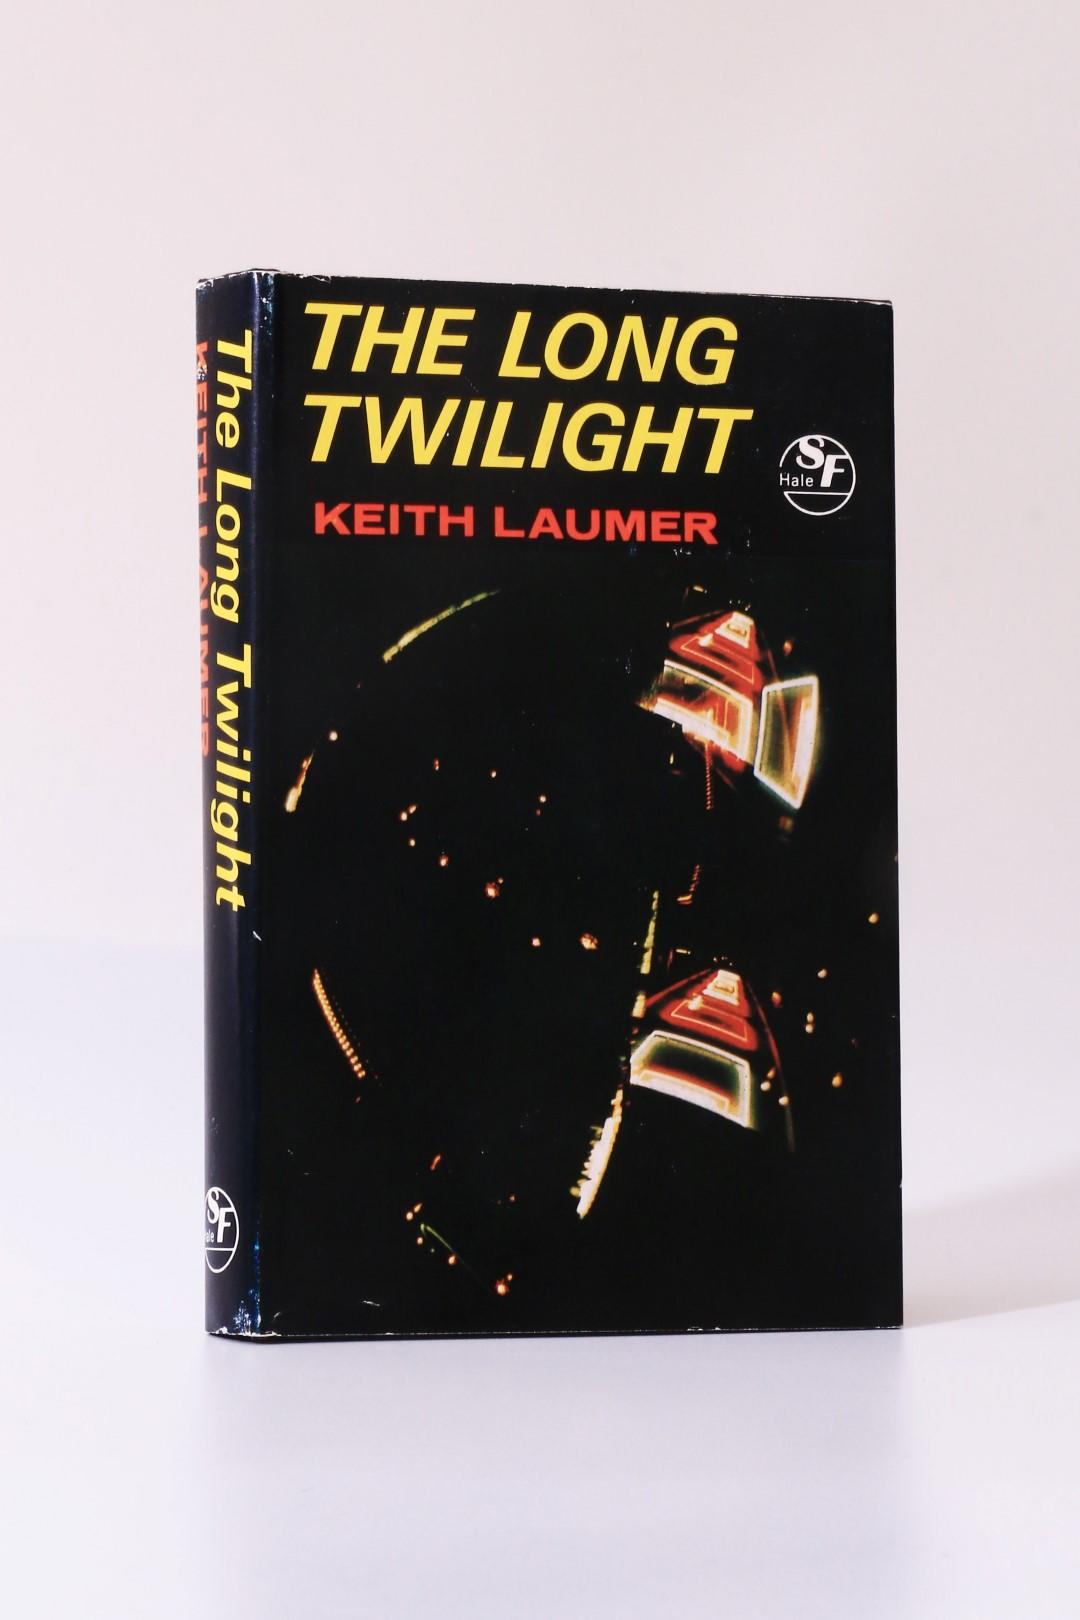 Keith Laumer - The Long Twilight - Robert Hale, 1976, First Edition.